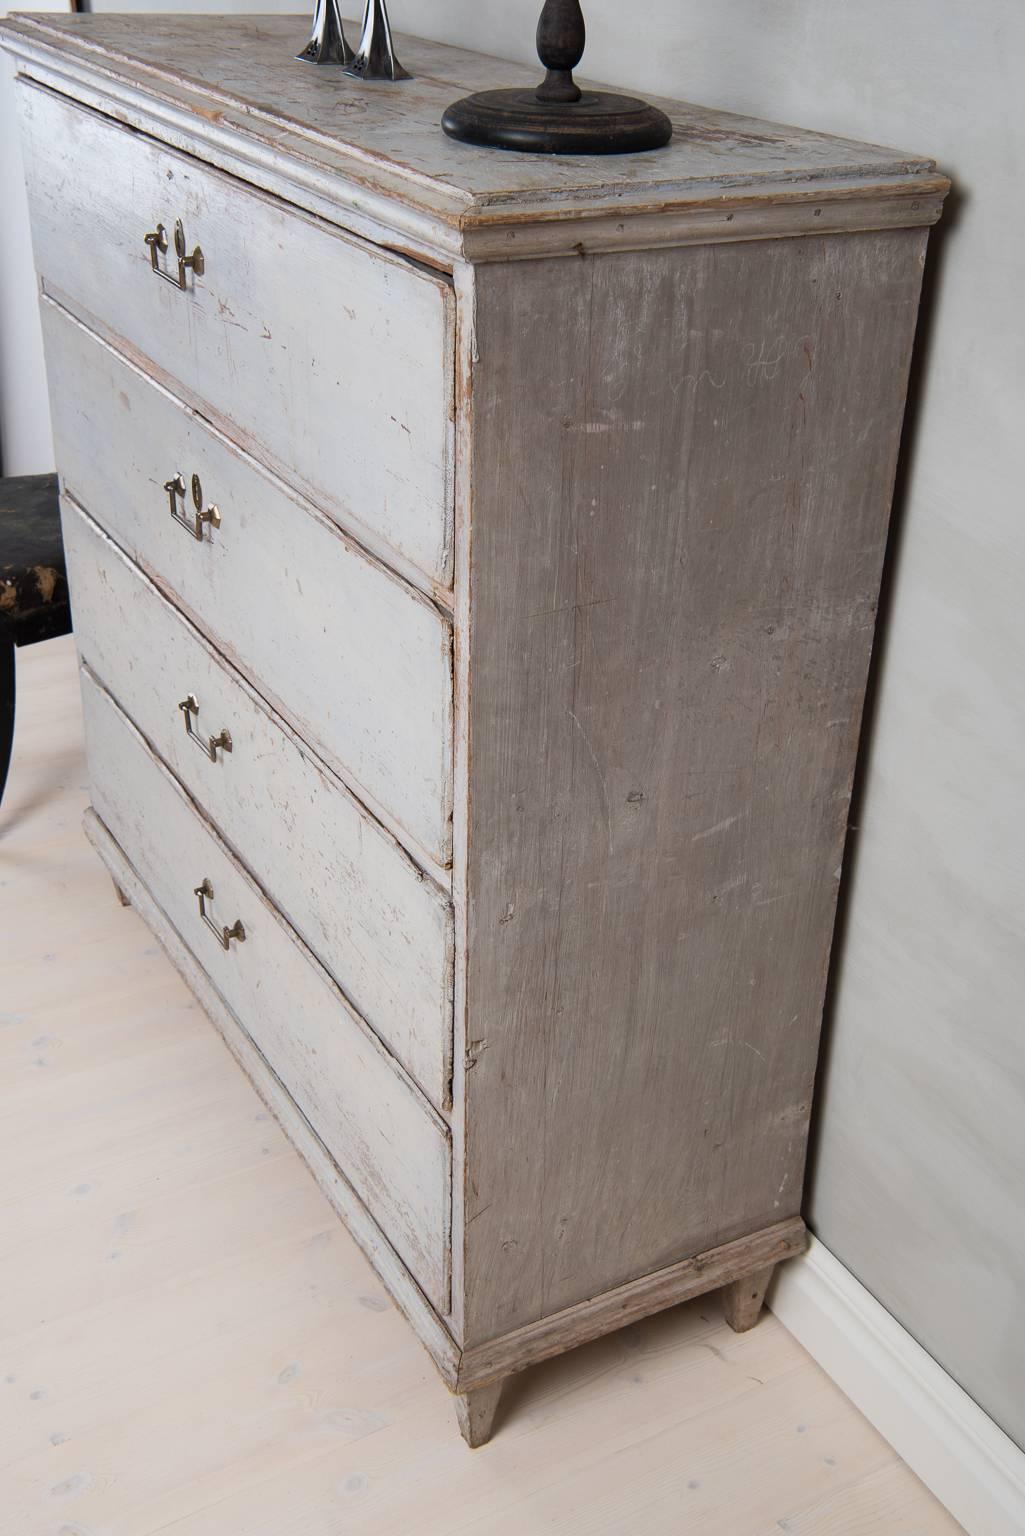 19th Century Swedish Provincial Gustavian Bureau from the Early 1800s with Original Paint